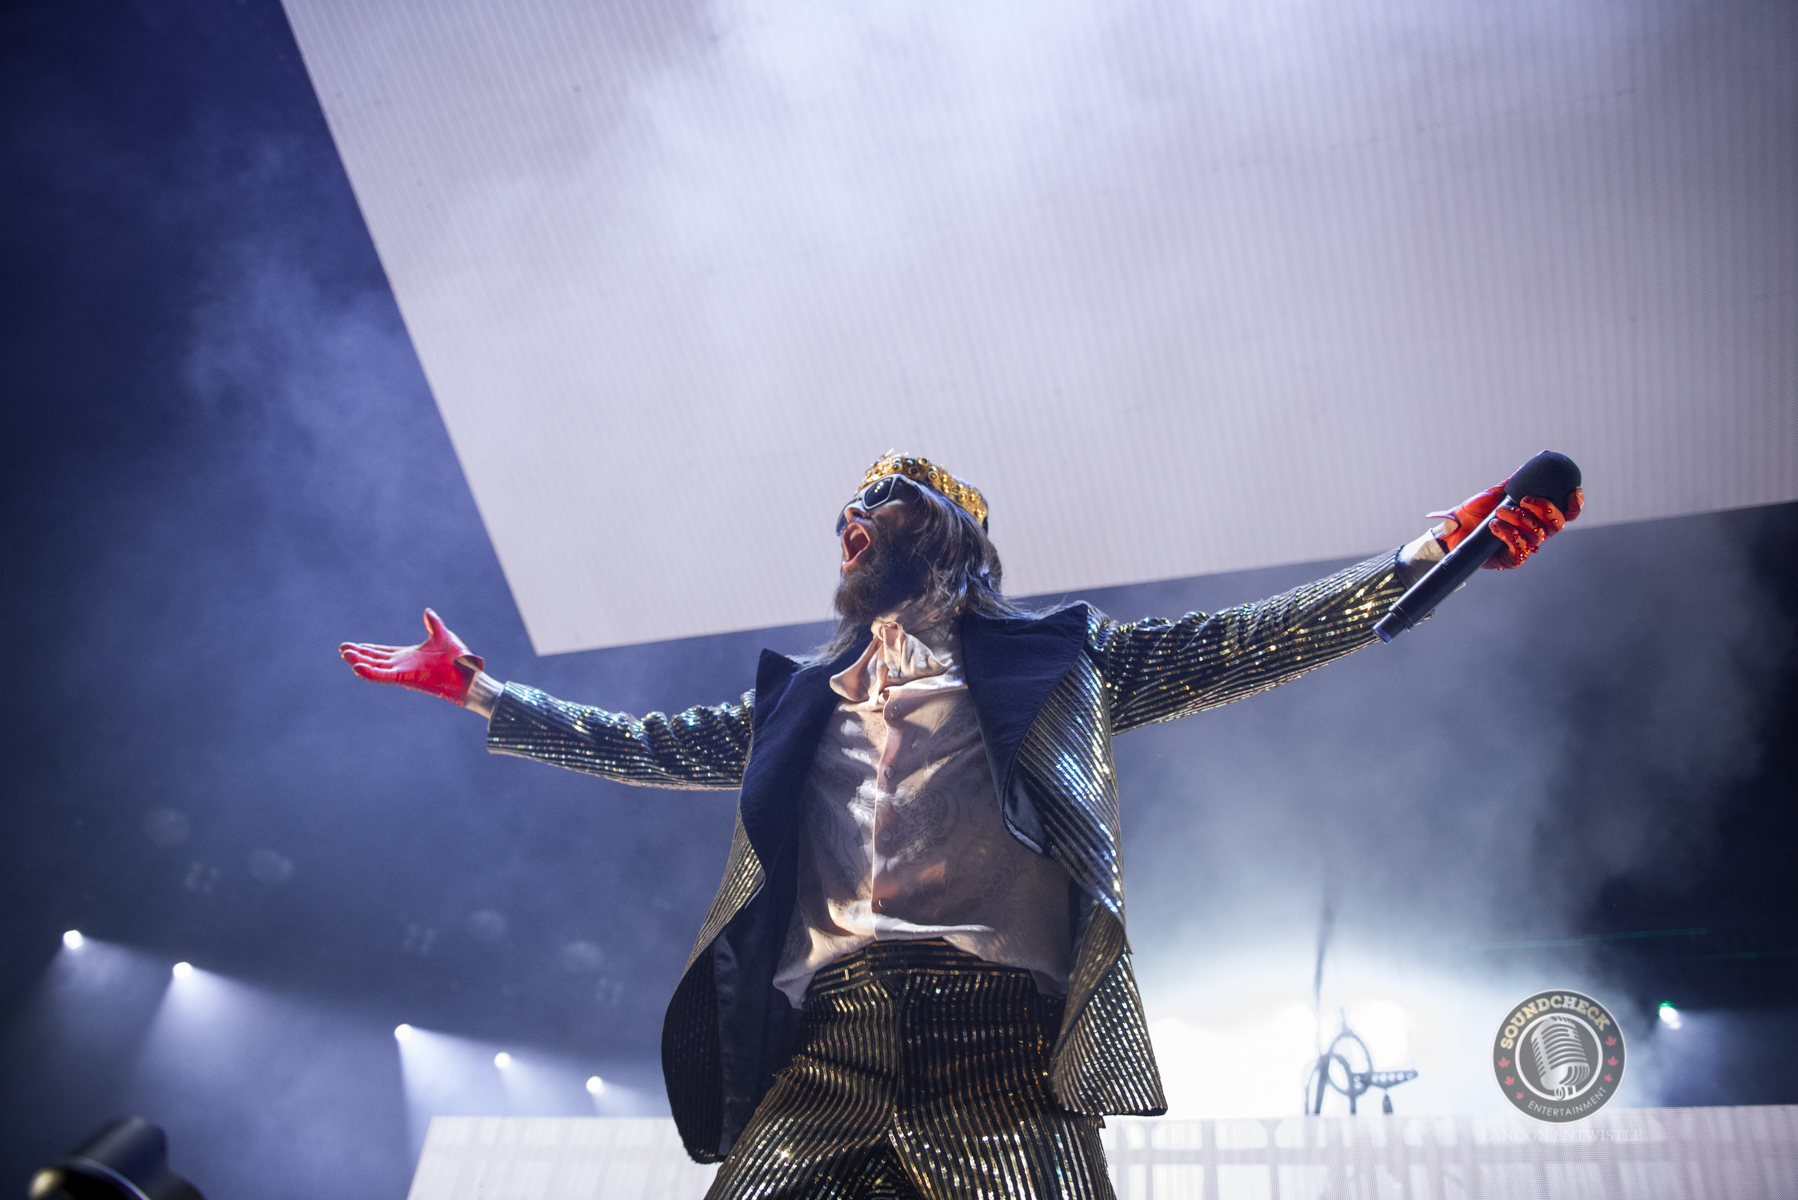 30 Seconds to Mars at Place Bell